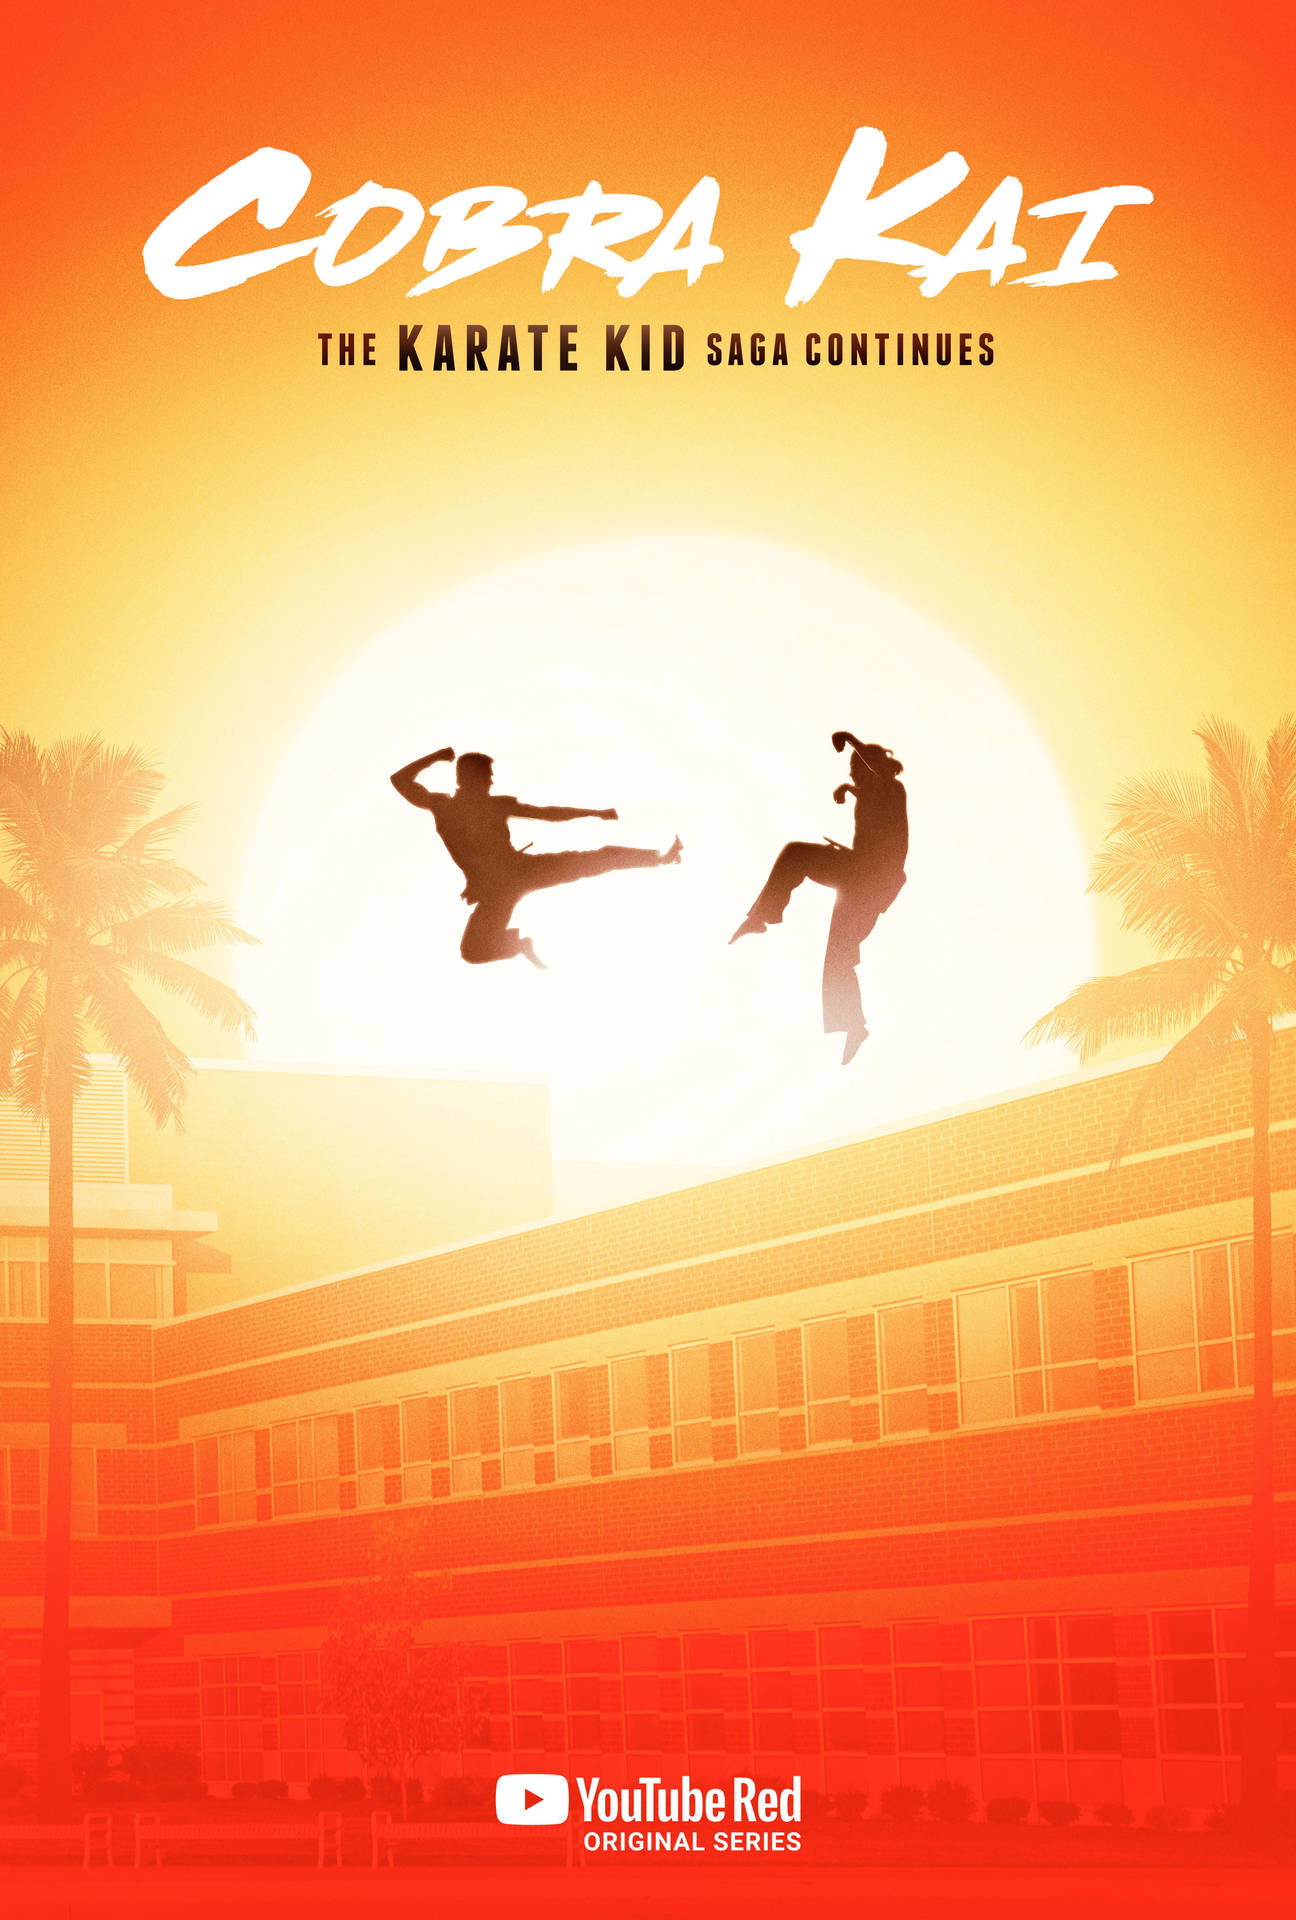 Strike first and strike hard against enemies in the shadows with Cobra Kai. Wallpaper